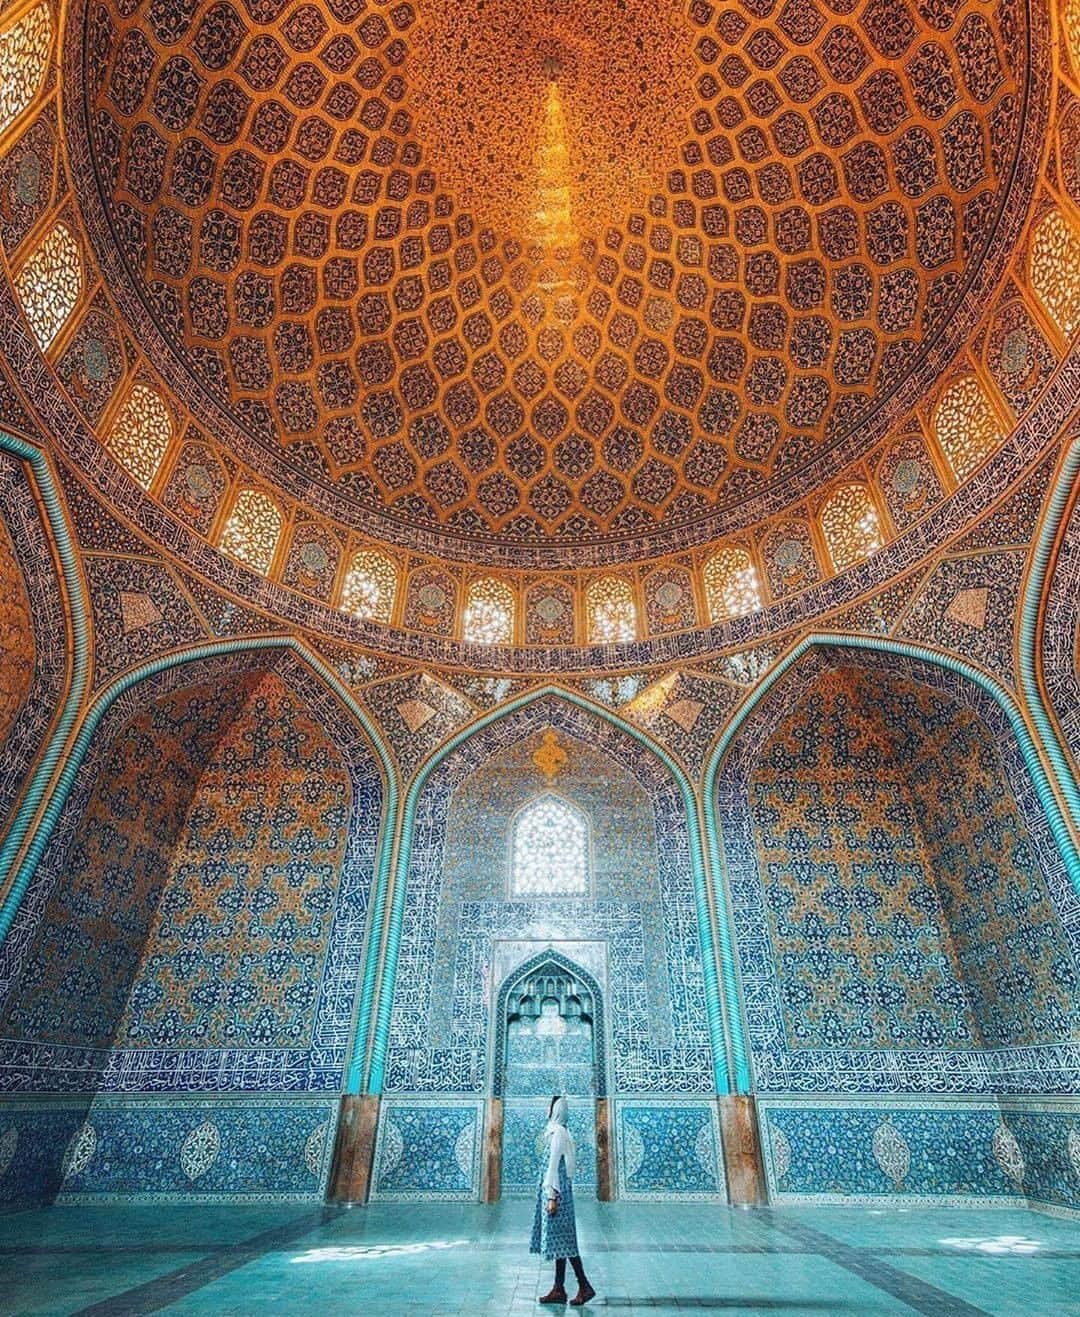 Discover Earthさんのインスタグラム写真 - (Discover EarthInstagram)「"You’ve most likely seen Iran all over the news lately. And it got me thinking once again about how all we ever see about Iran in the media is this negative image tainted by politics. ⠀⠀⠀⠀⠀⠀⠀⠀⠀ But the news and media never paint the whole picture. They only show one tiny fraction of a country. They focus on governments and politicians, but rarely on the rest of the people or the beautiful culture of a place. ⠀⠀⠀⠀⠀⠀⠀⠀⠀ I experienced nothing but warmth, kindness and hospitality from Iranians during my 2 weeks there. And I’ve yet to meet another person who’s been to Iran who disagrees with me on that. What’s more - the culture, history and architecture there are simply incredible. ⠀⠀⠀⠀⠀⠀⠀⠀⠀ But you never see that on the news. ⠀⠀⠀⠀⠀⠀⠀⠀⠀ This page isn’t about politics and I’m far from a political expert, so let’s steer away from that. I simply hope for more peace, open minds and compassion for all the beautiful cultures that co-exist in our world 🙏🏼💙 ⠀⠀⠀⠀⠀⠀⠀⠀⠀ Disclaimer: The current political situation is quite serious as you all know. Please check your country’s official government travel advice for information on travel safety in Iran right now. ⠀⠀⠀⠀⠀⠀⠀⠀⠀ 📍Shah Mosque, Esfahan, Iran  🇮🇷#discoveriran with @thediaryofanomad  #iran #mosque #esfahan」7月28日 0時00分 - discoverearth